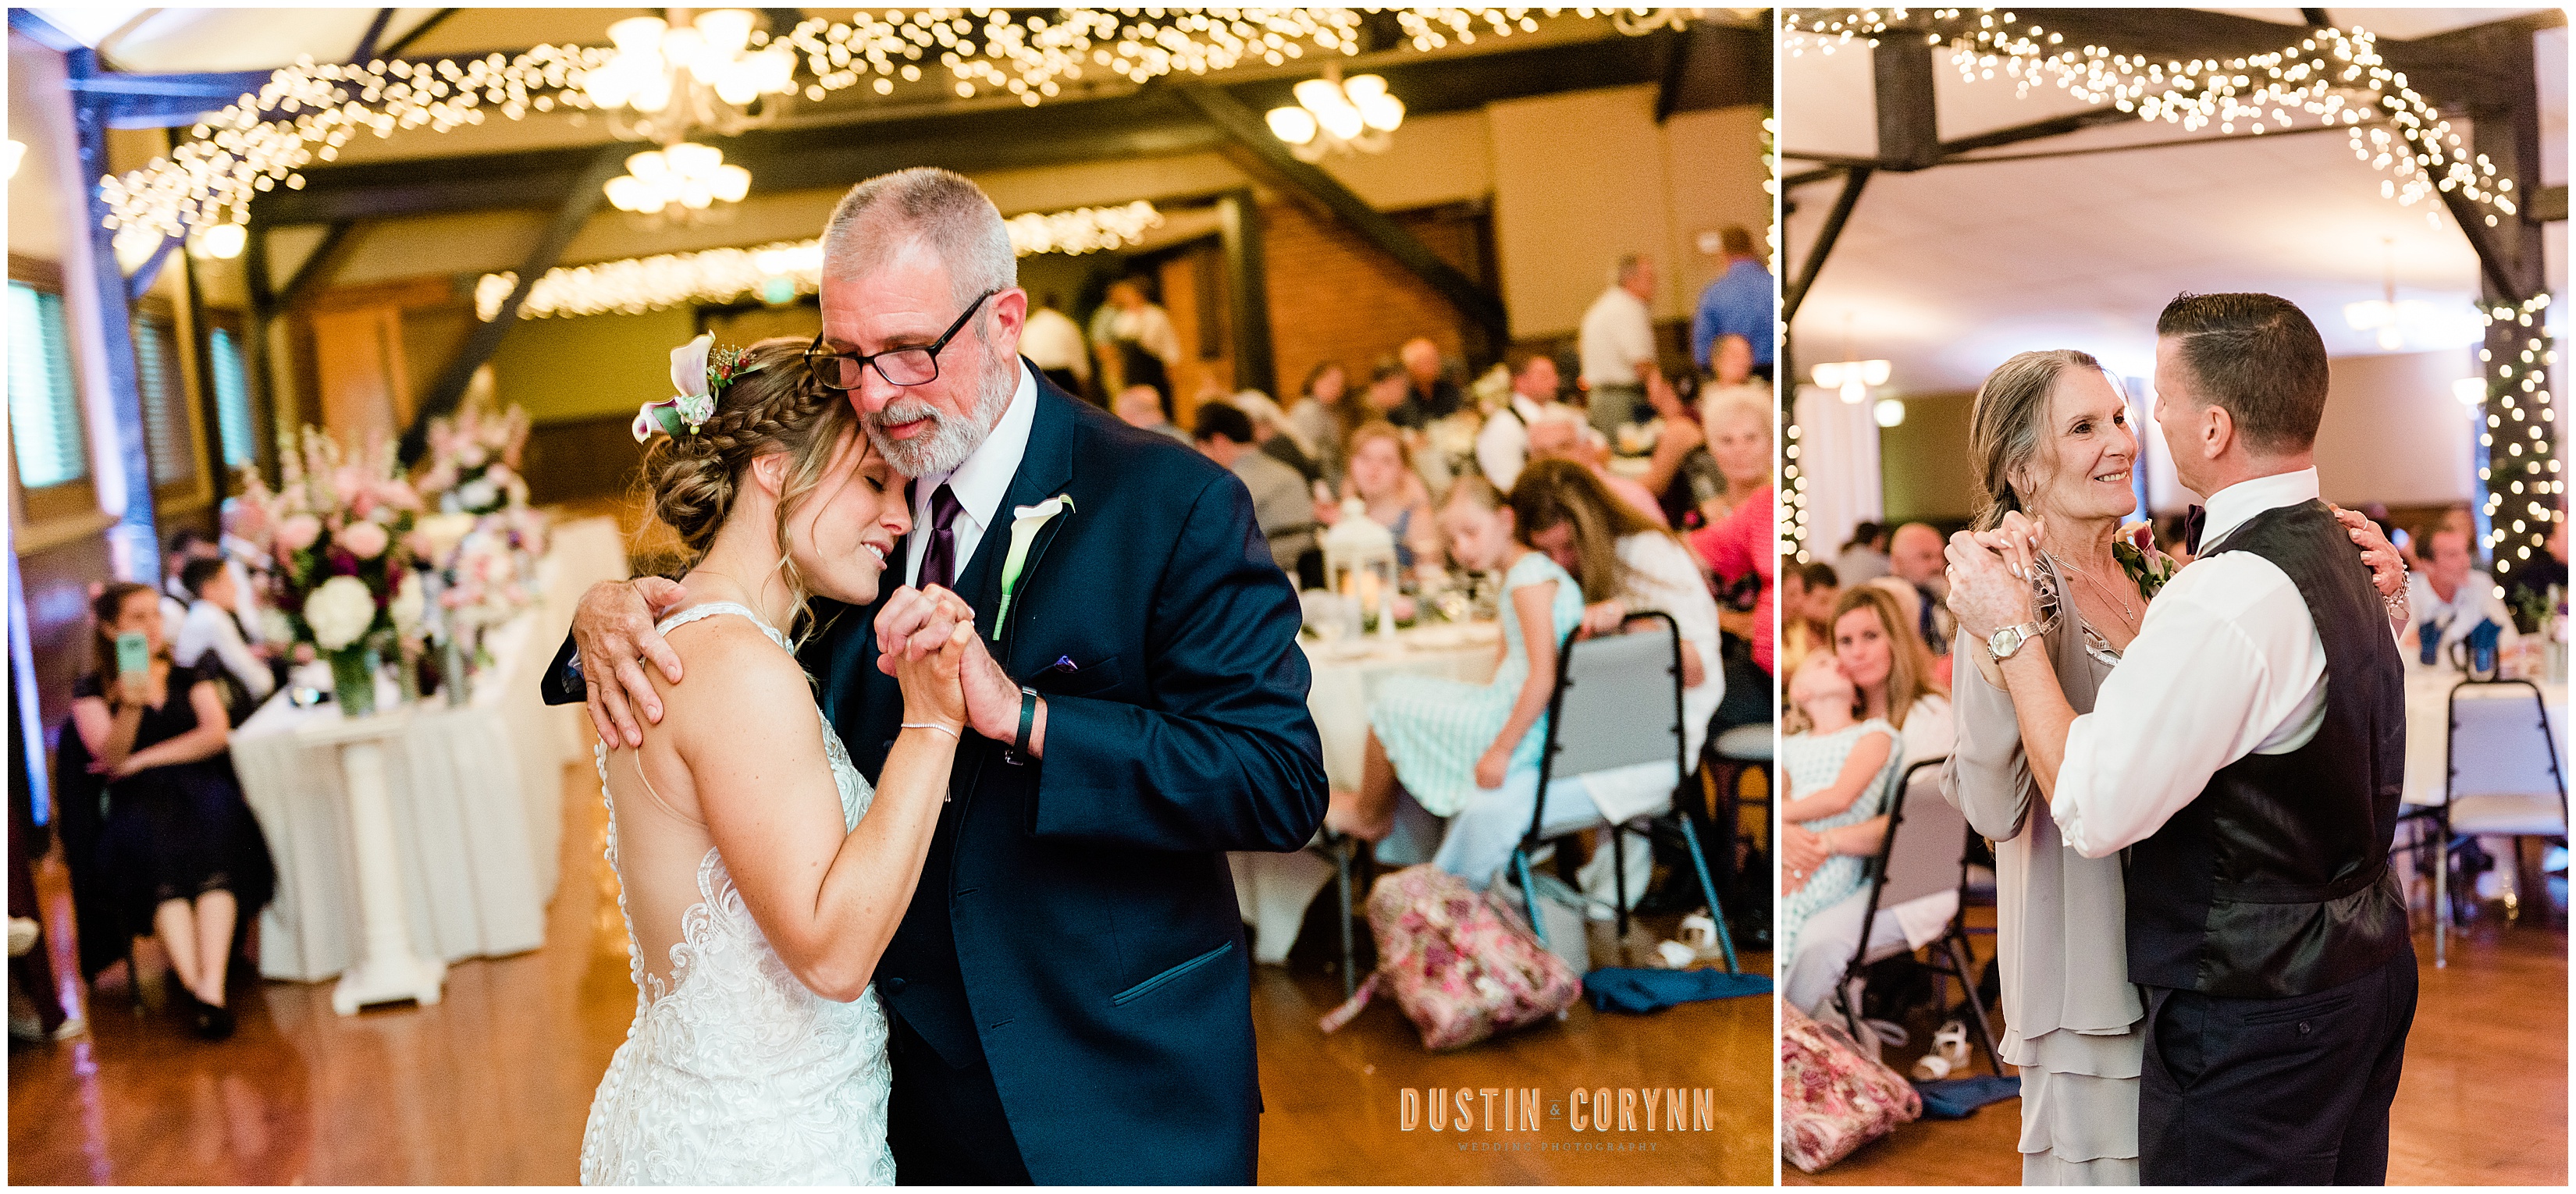 First Dances at Reception